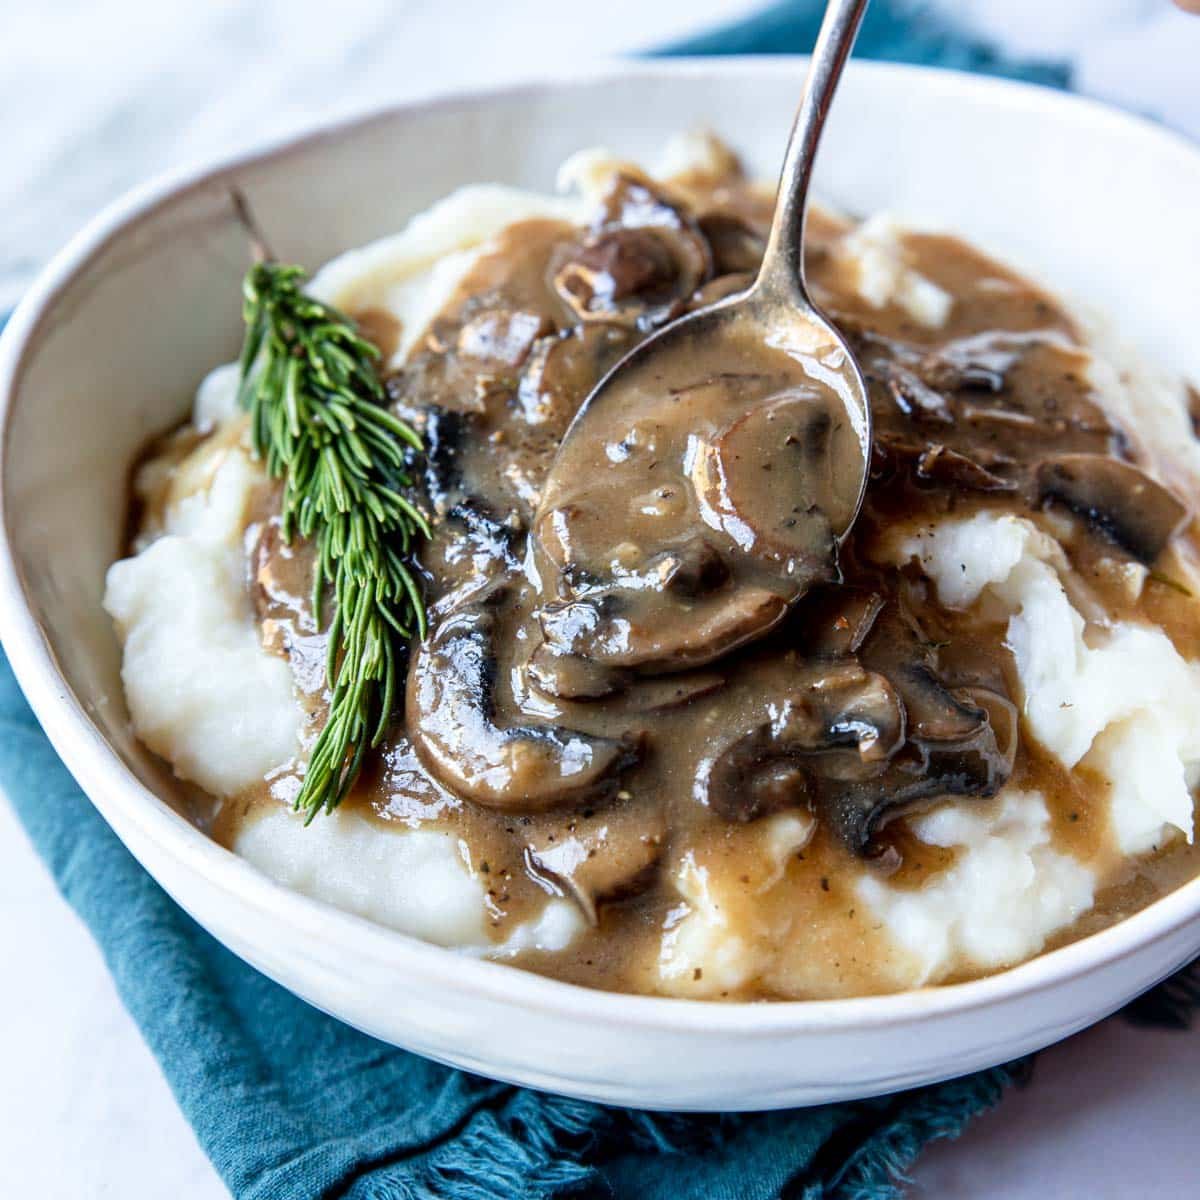 Mushroom gravy being spooned over mashed potatoes